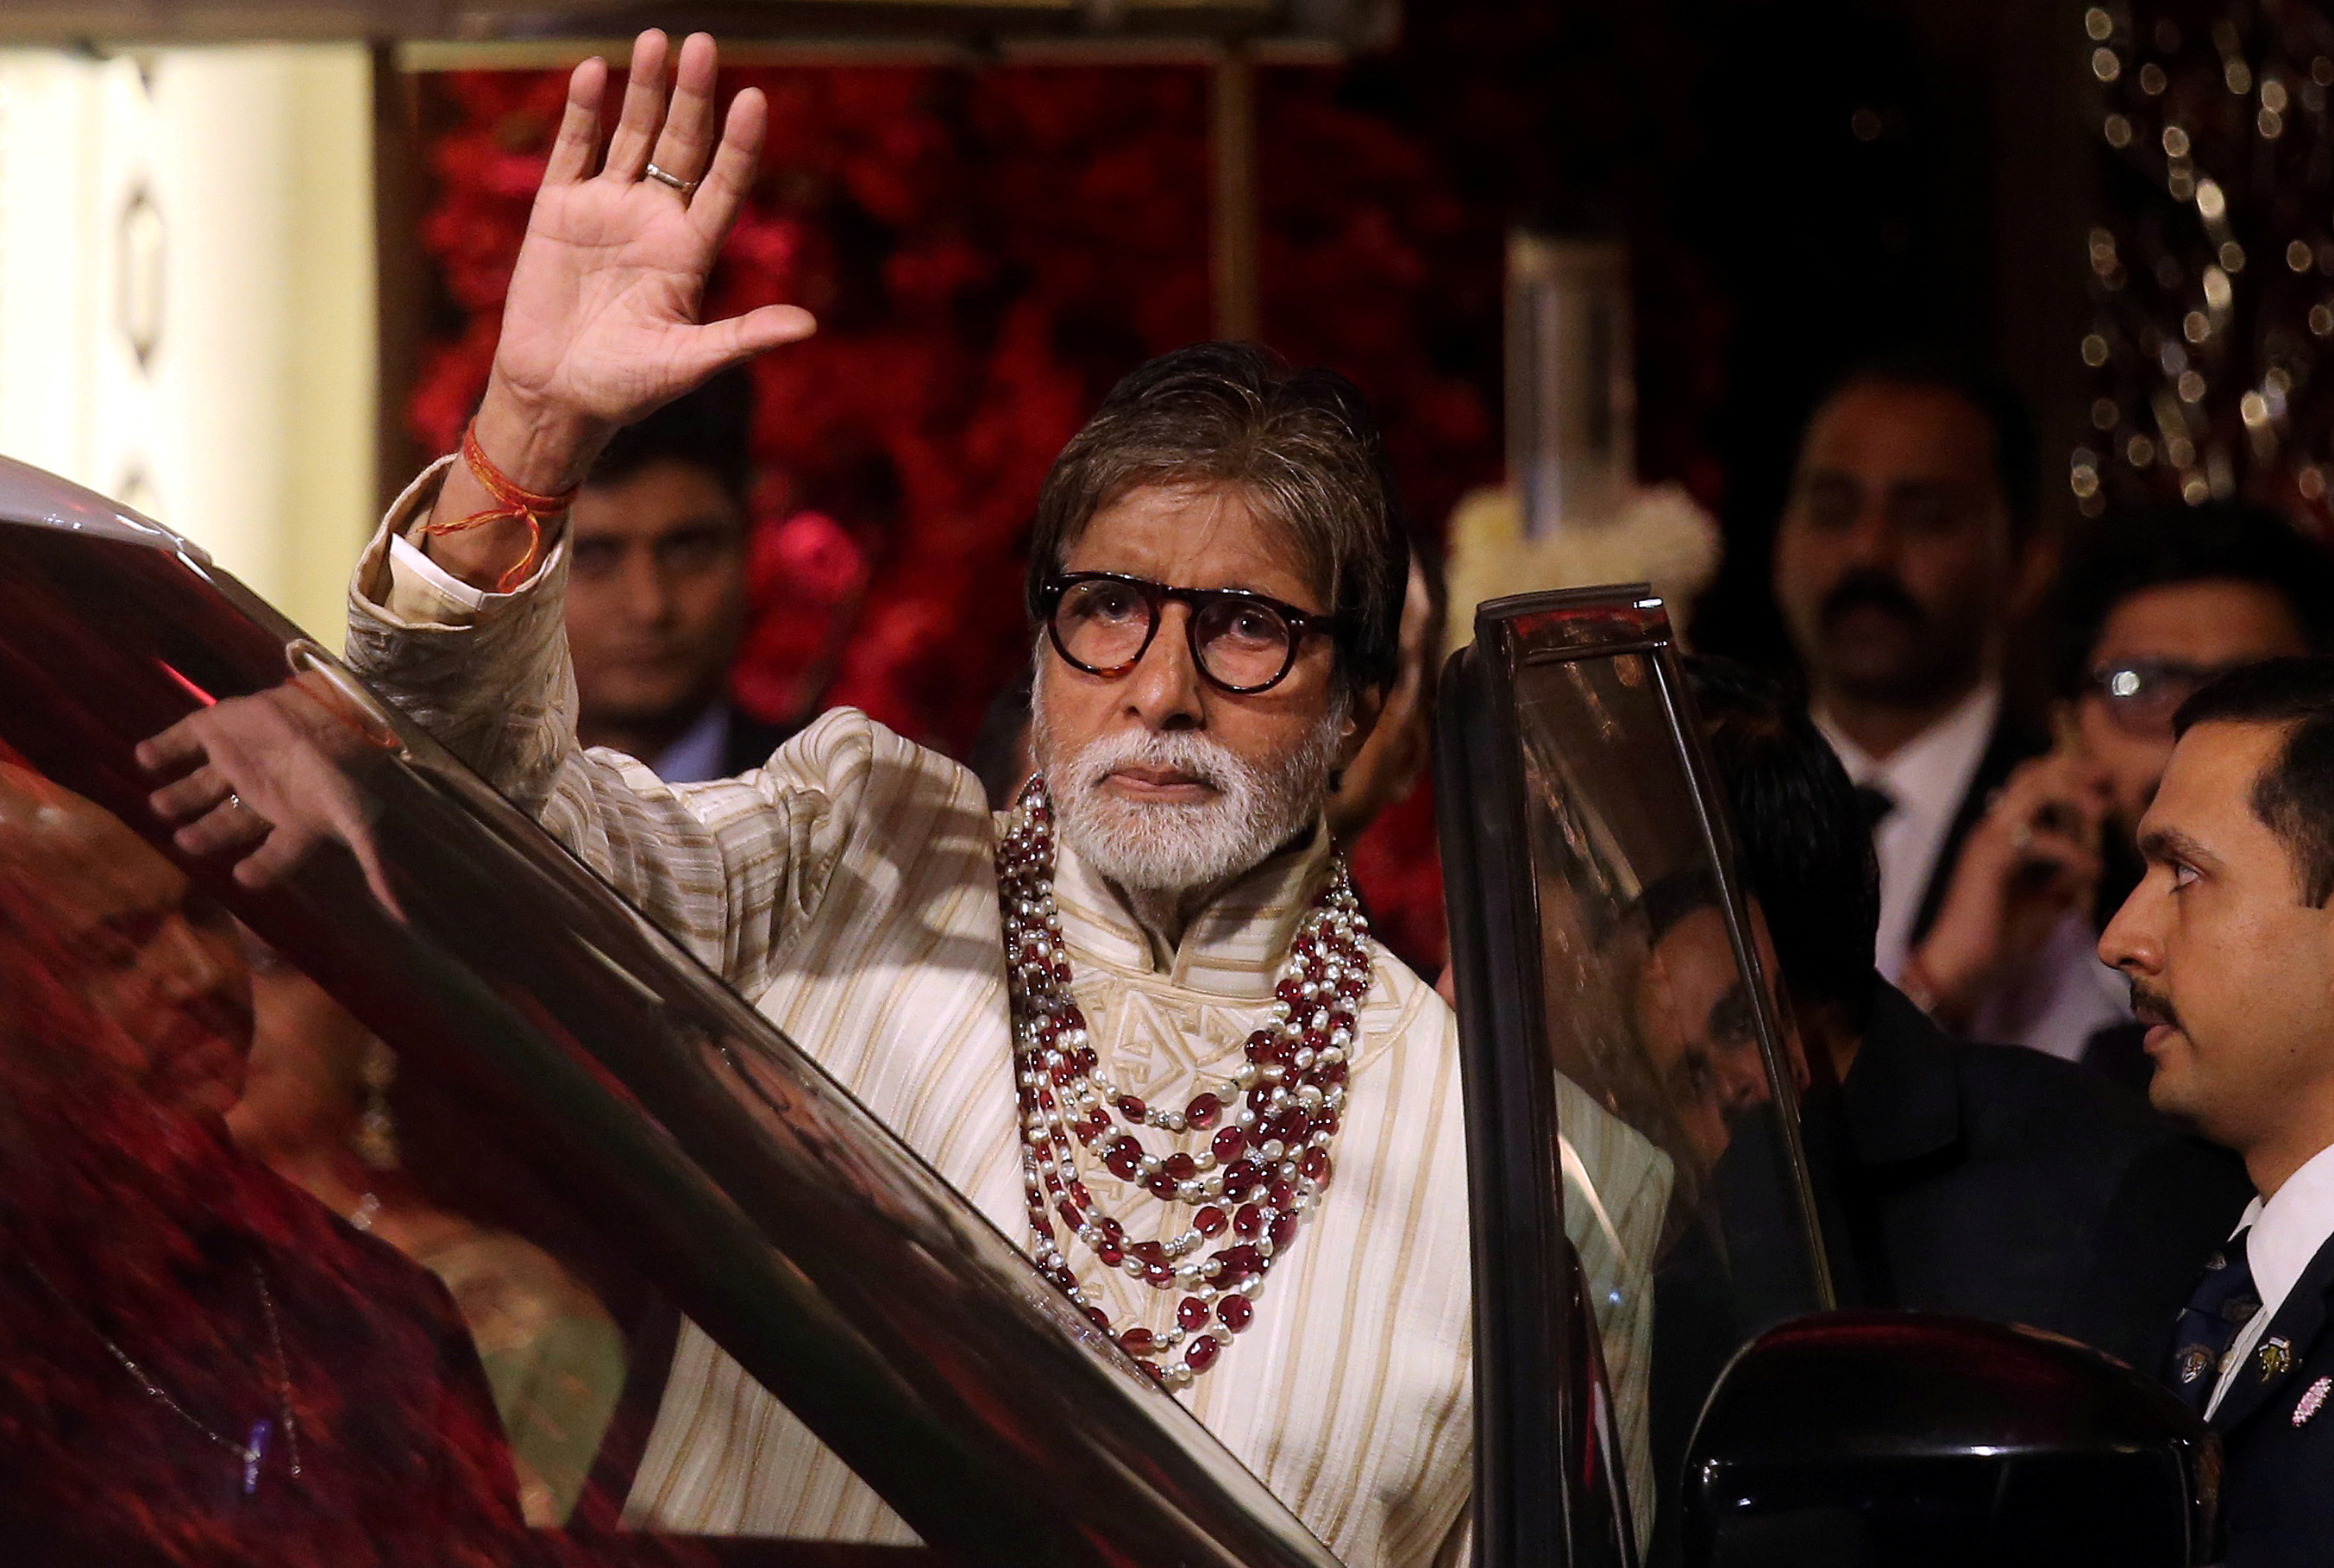 Bollywood actor Amitabh Bachchan leaves after attending the wedding ceremony of Isha Ambani, the daughter of the Chairman of Reliance Industries Mukesh Ambani, in Mumbai, India, December 13, 2018. REUTERS/Francis Mascarenhas/File Photo